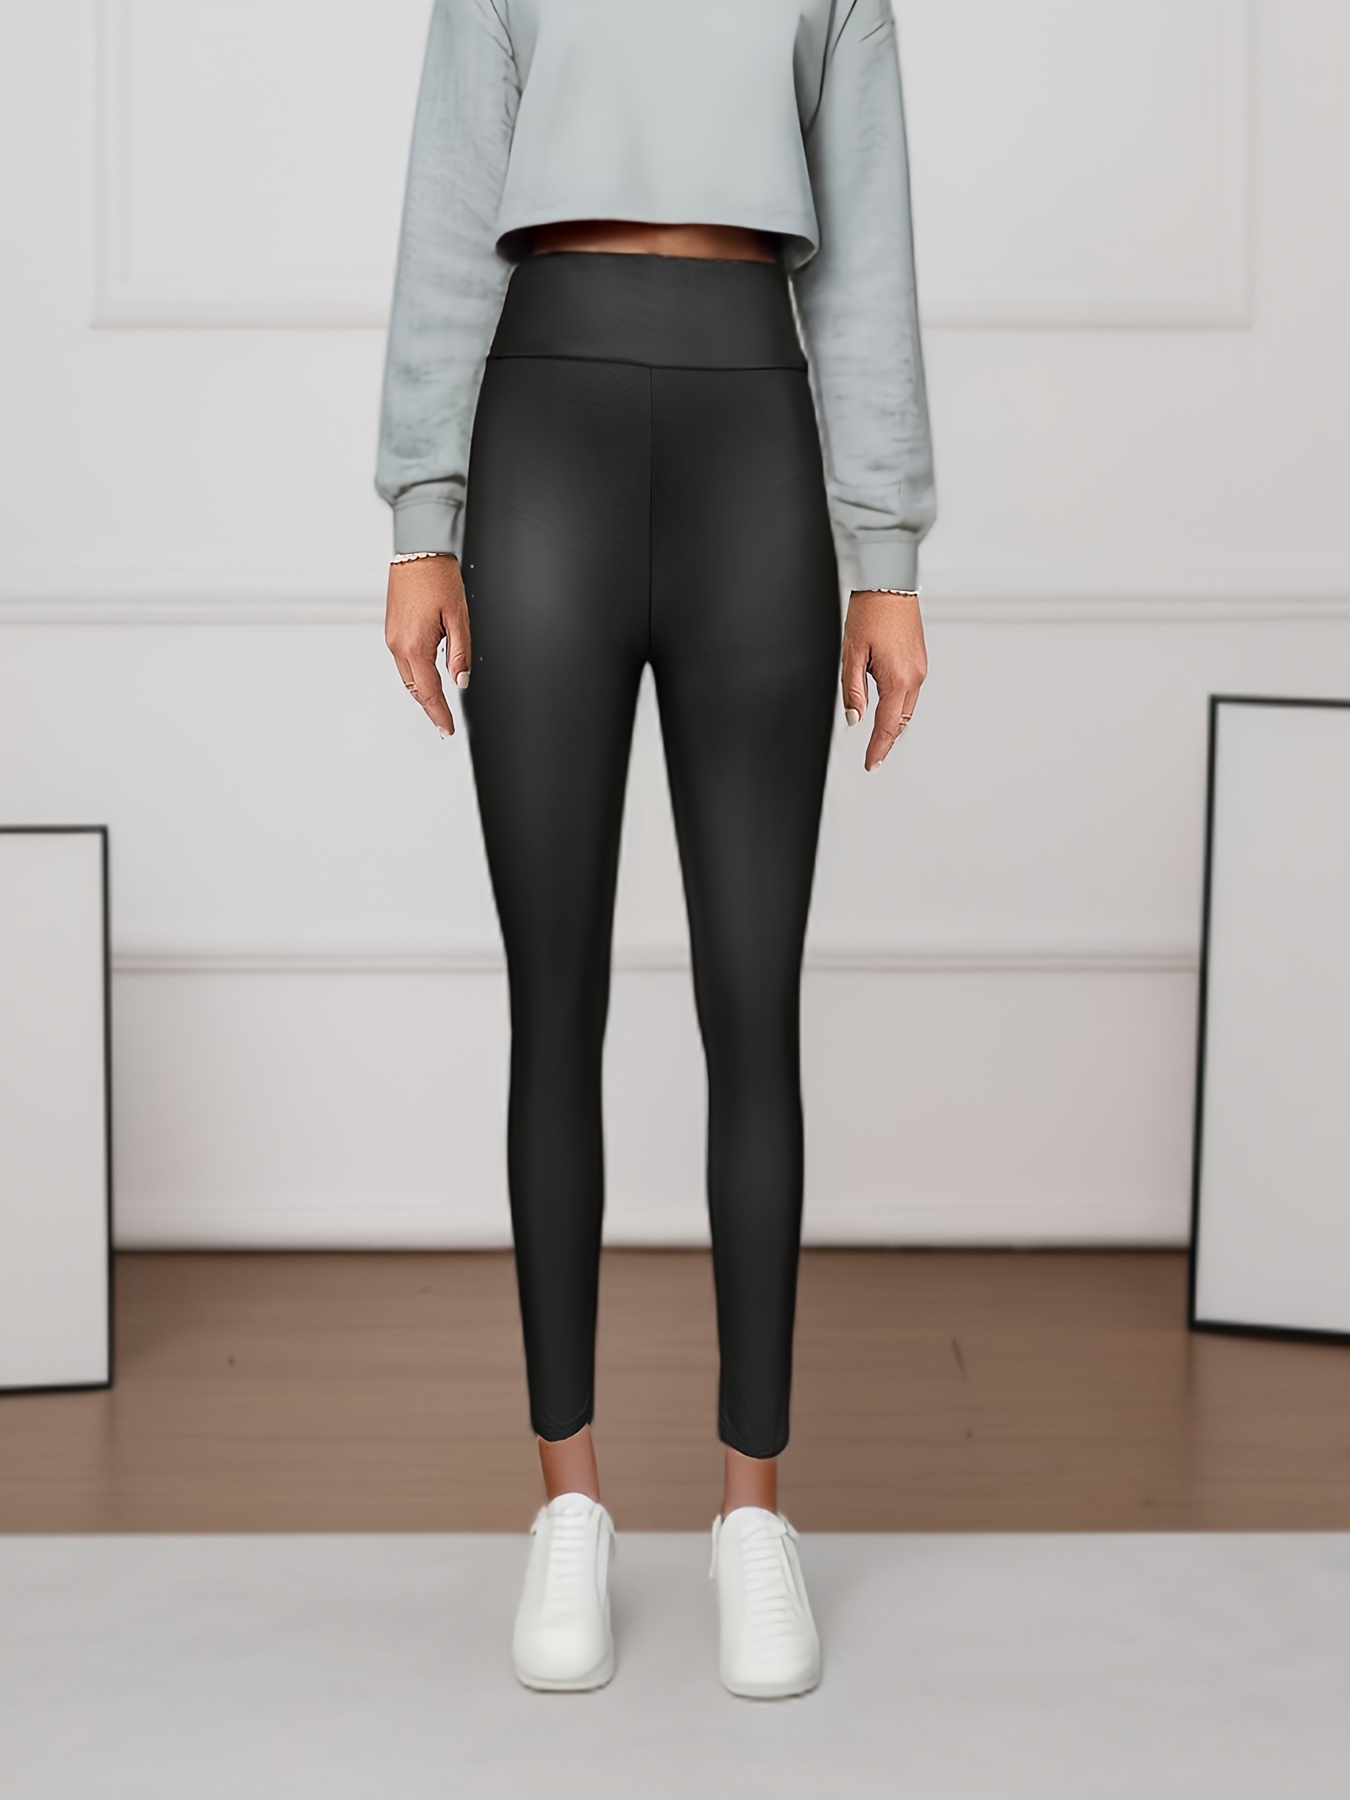 Topshop Tall high waisted legging in black